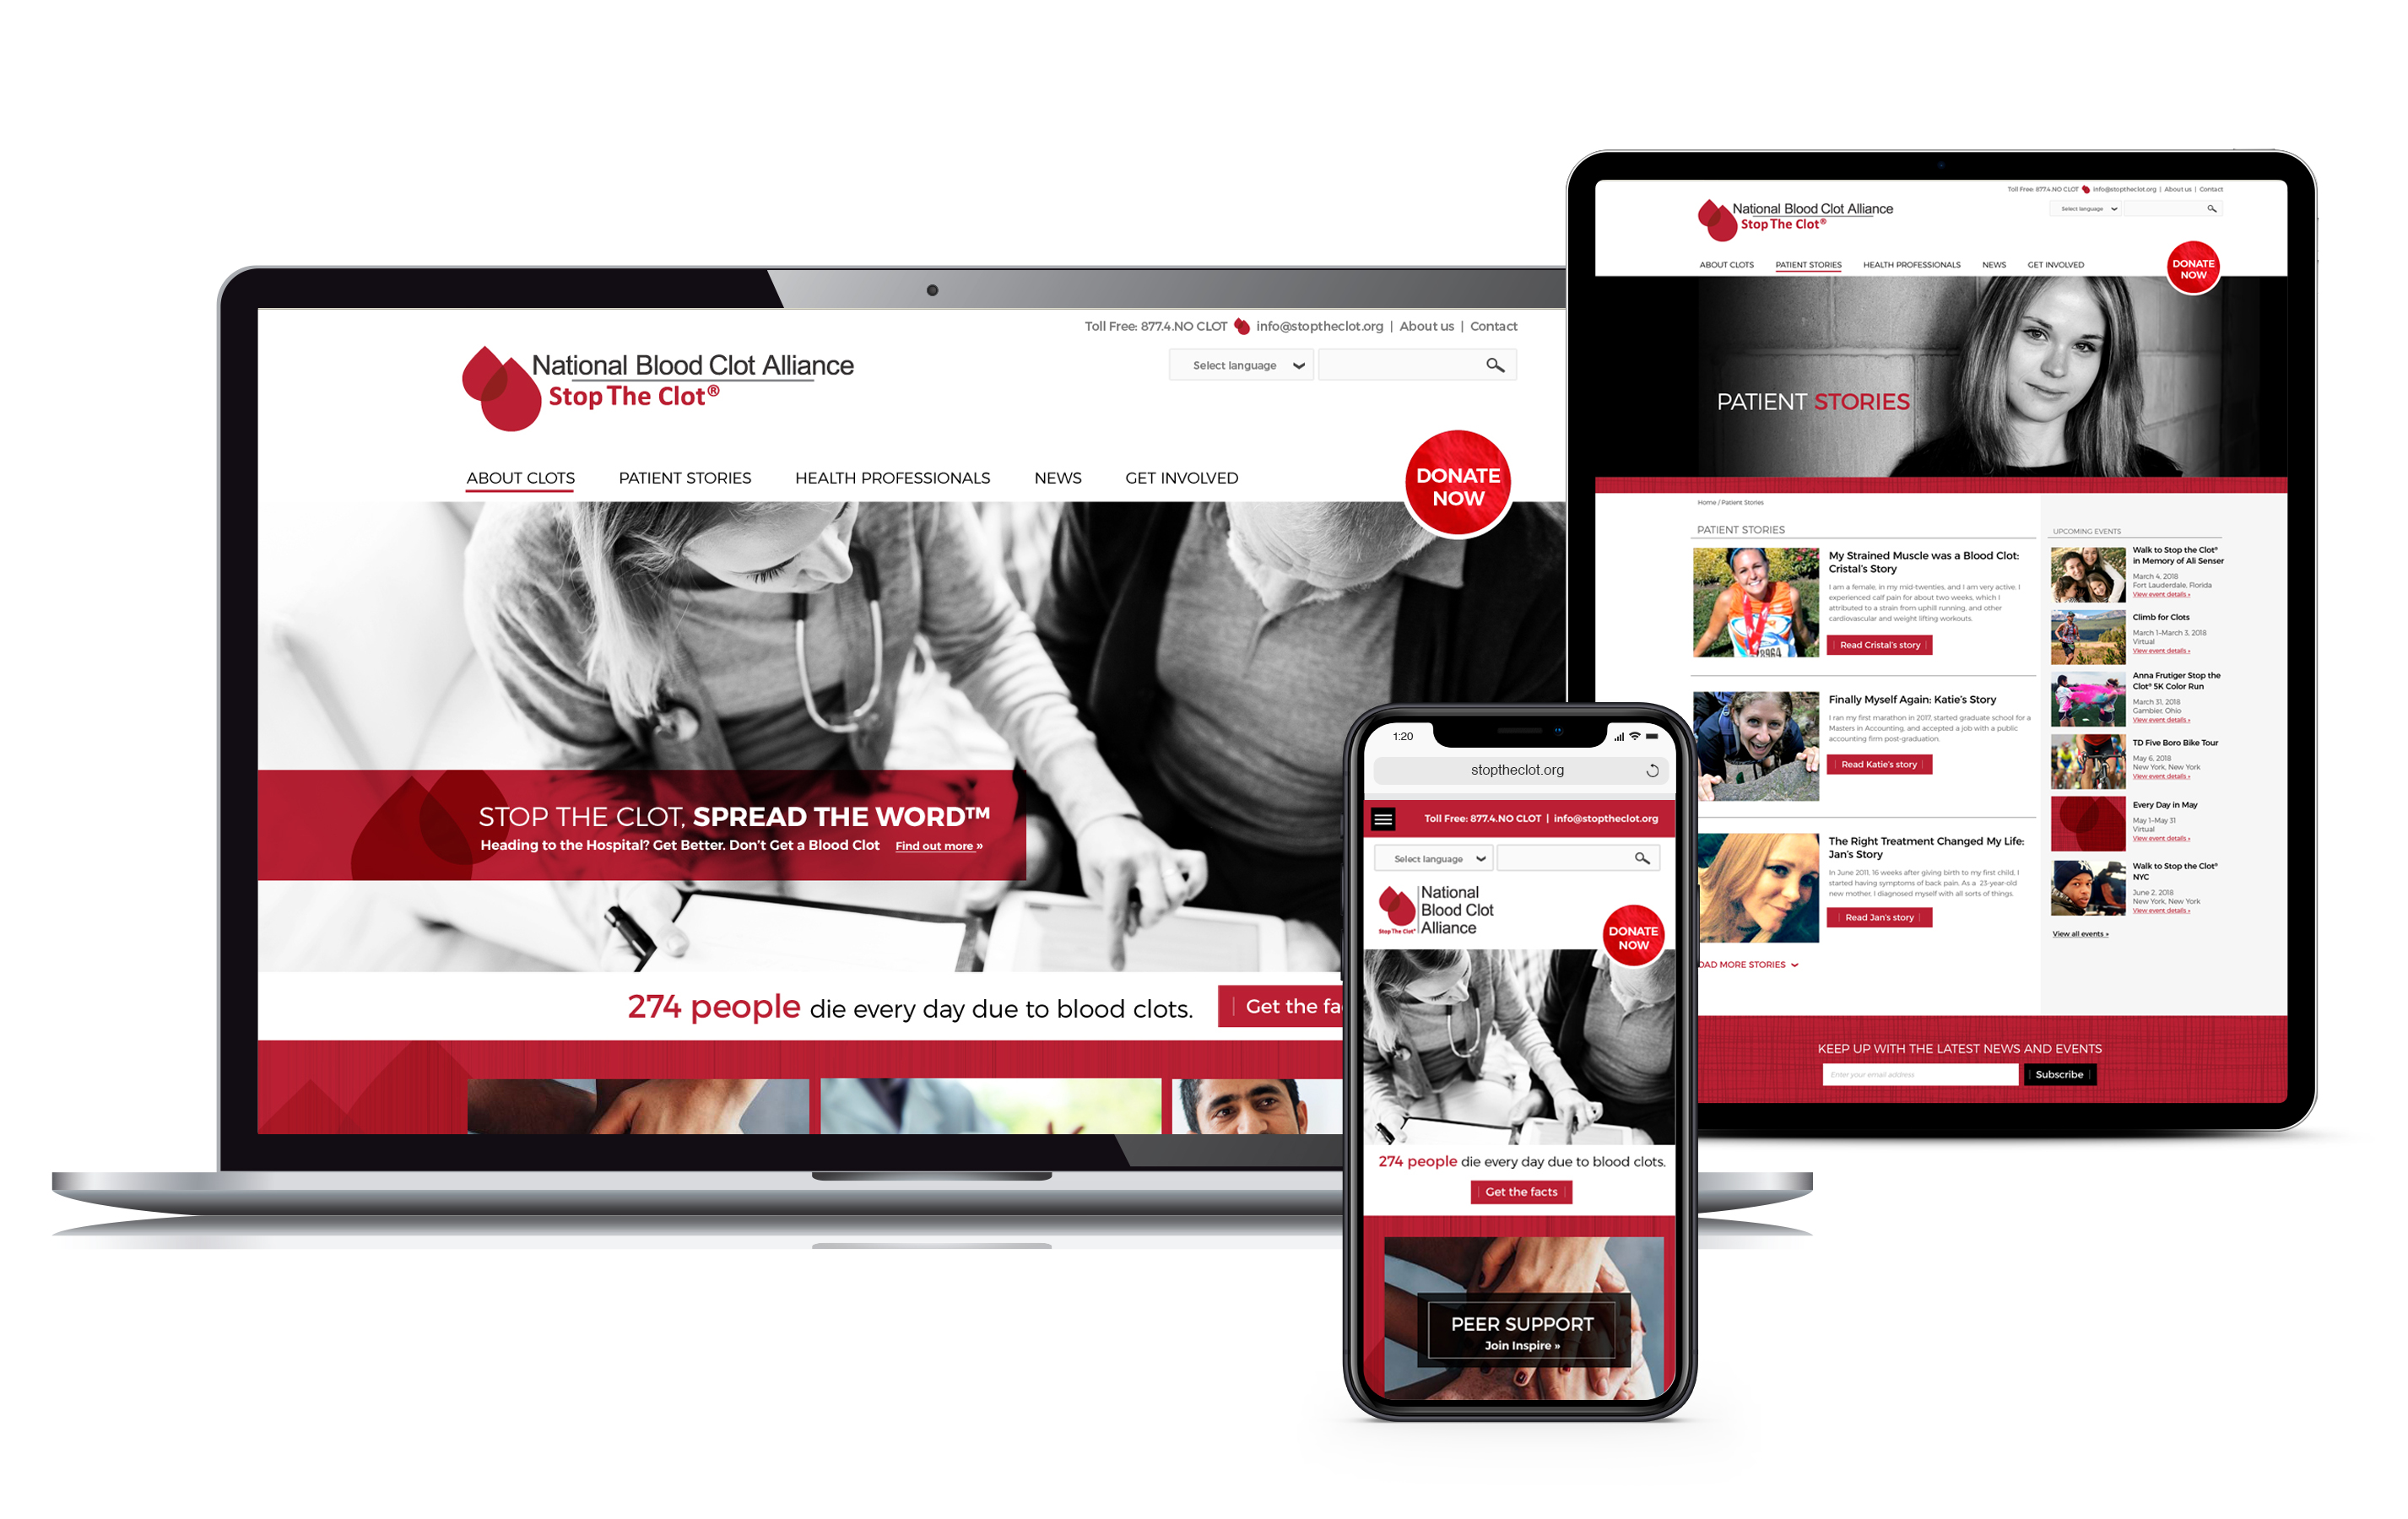 Pages of the National Blood Clot Alliance website created by Vendi Advertising displayed on laptop, tablet and phone screens